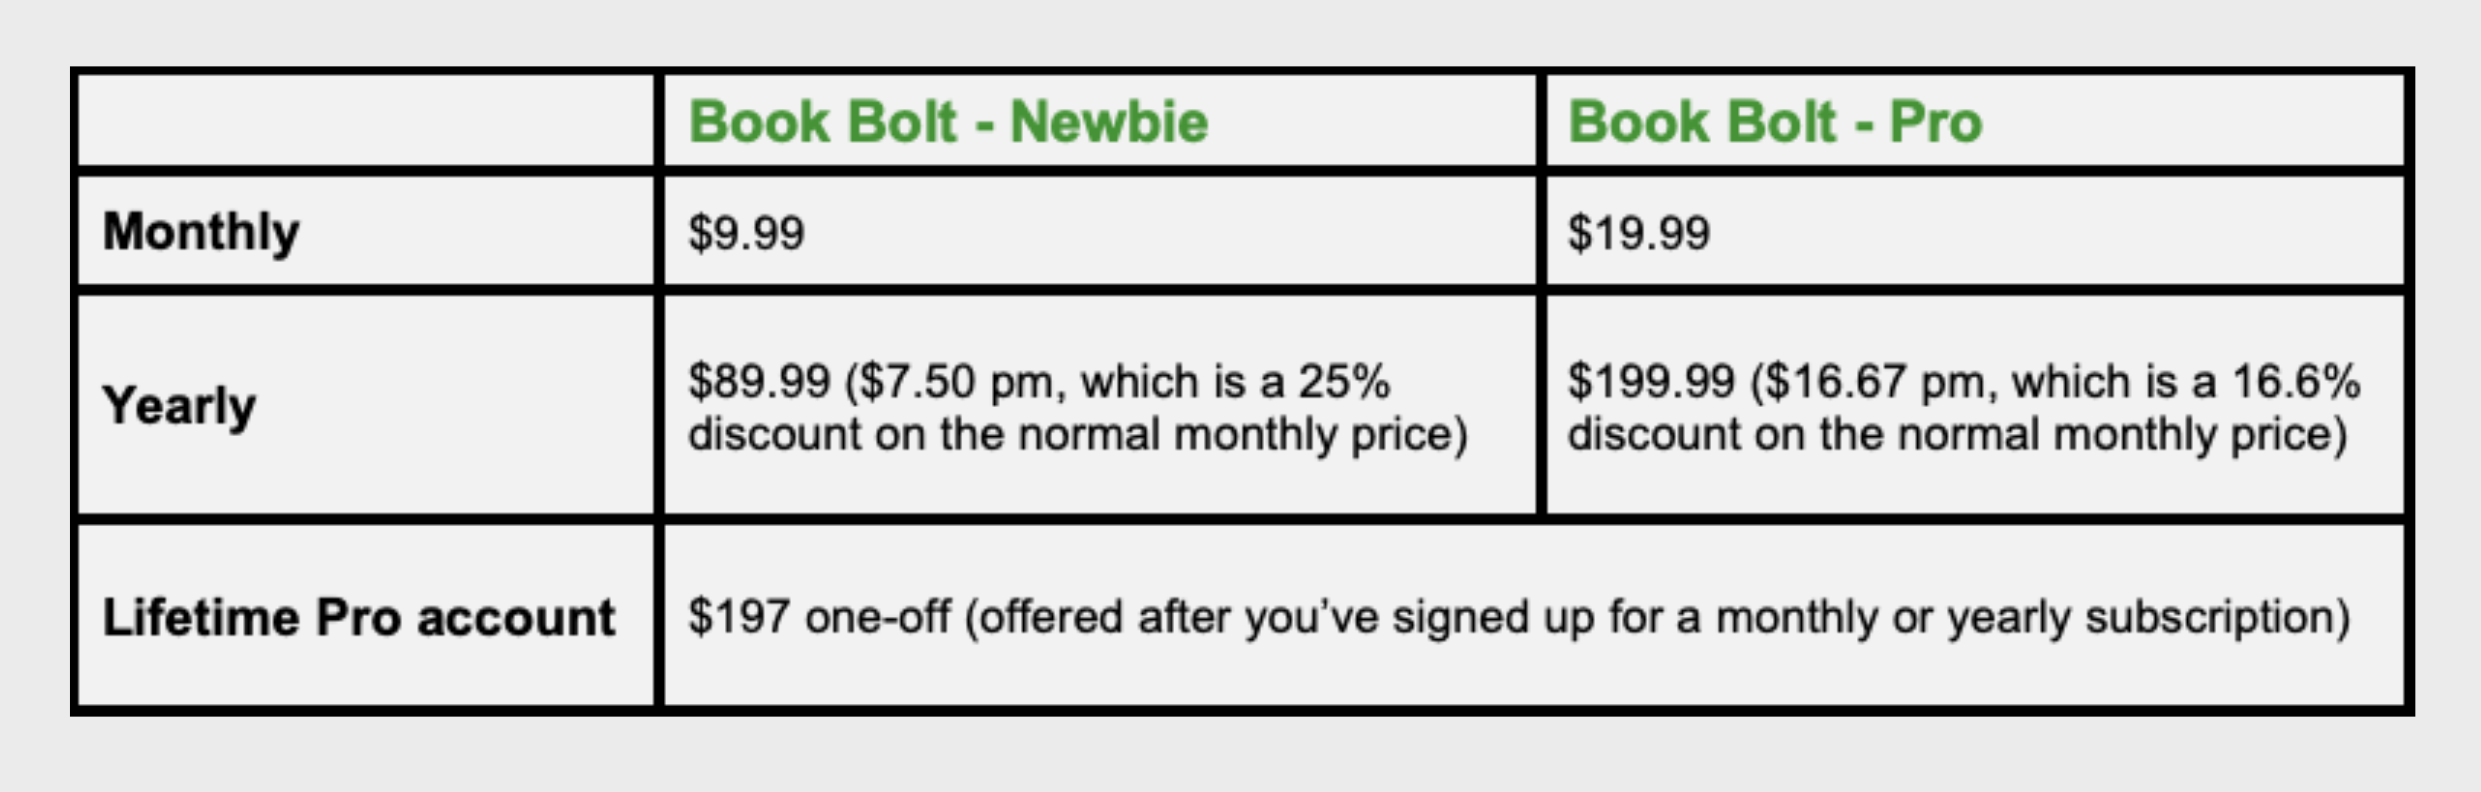 Book Bolt Pricing Table